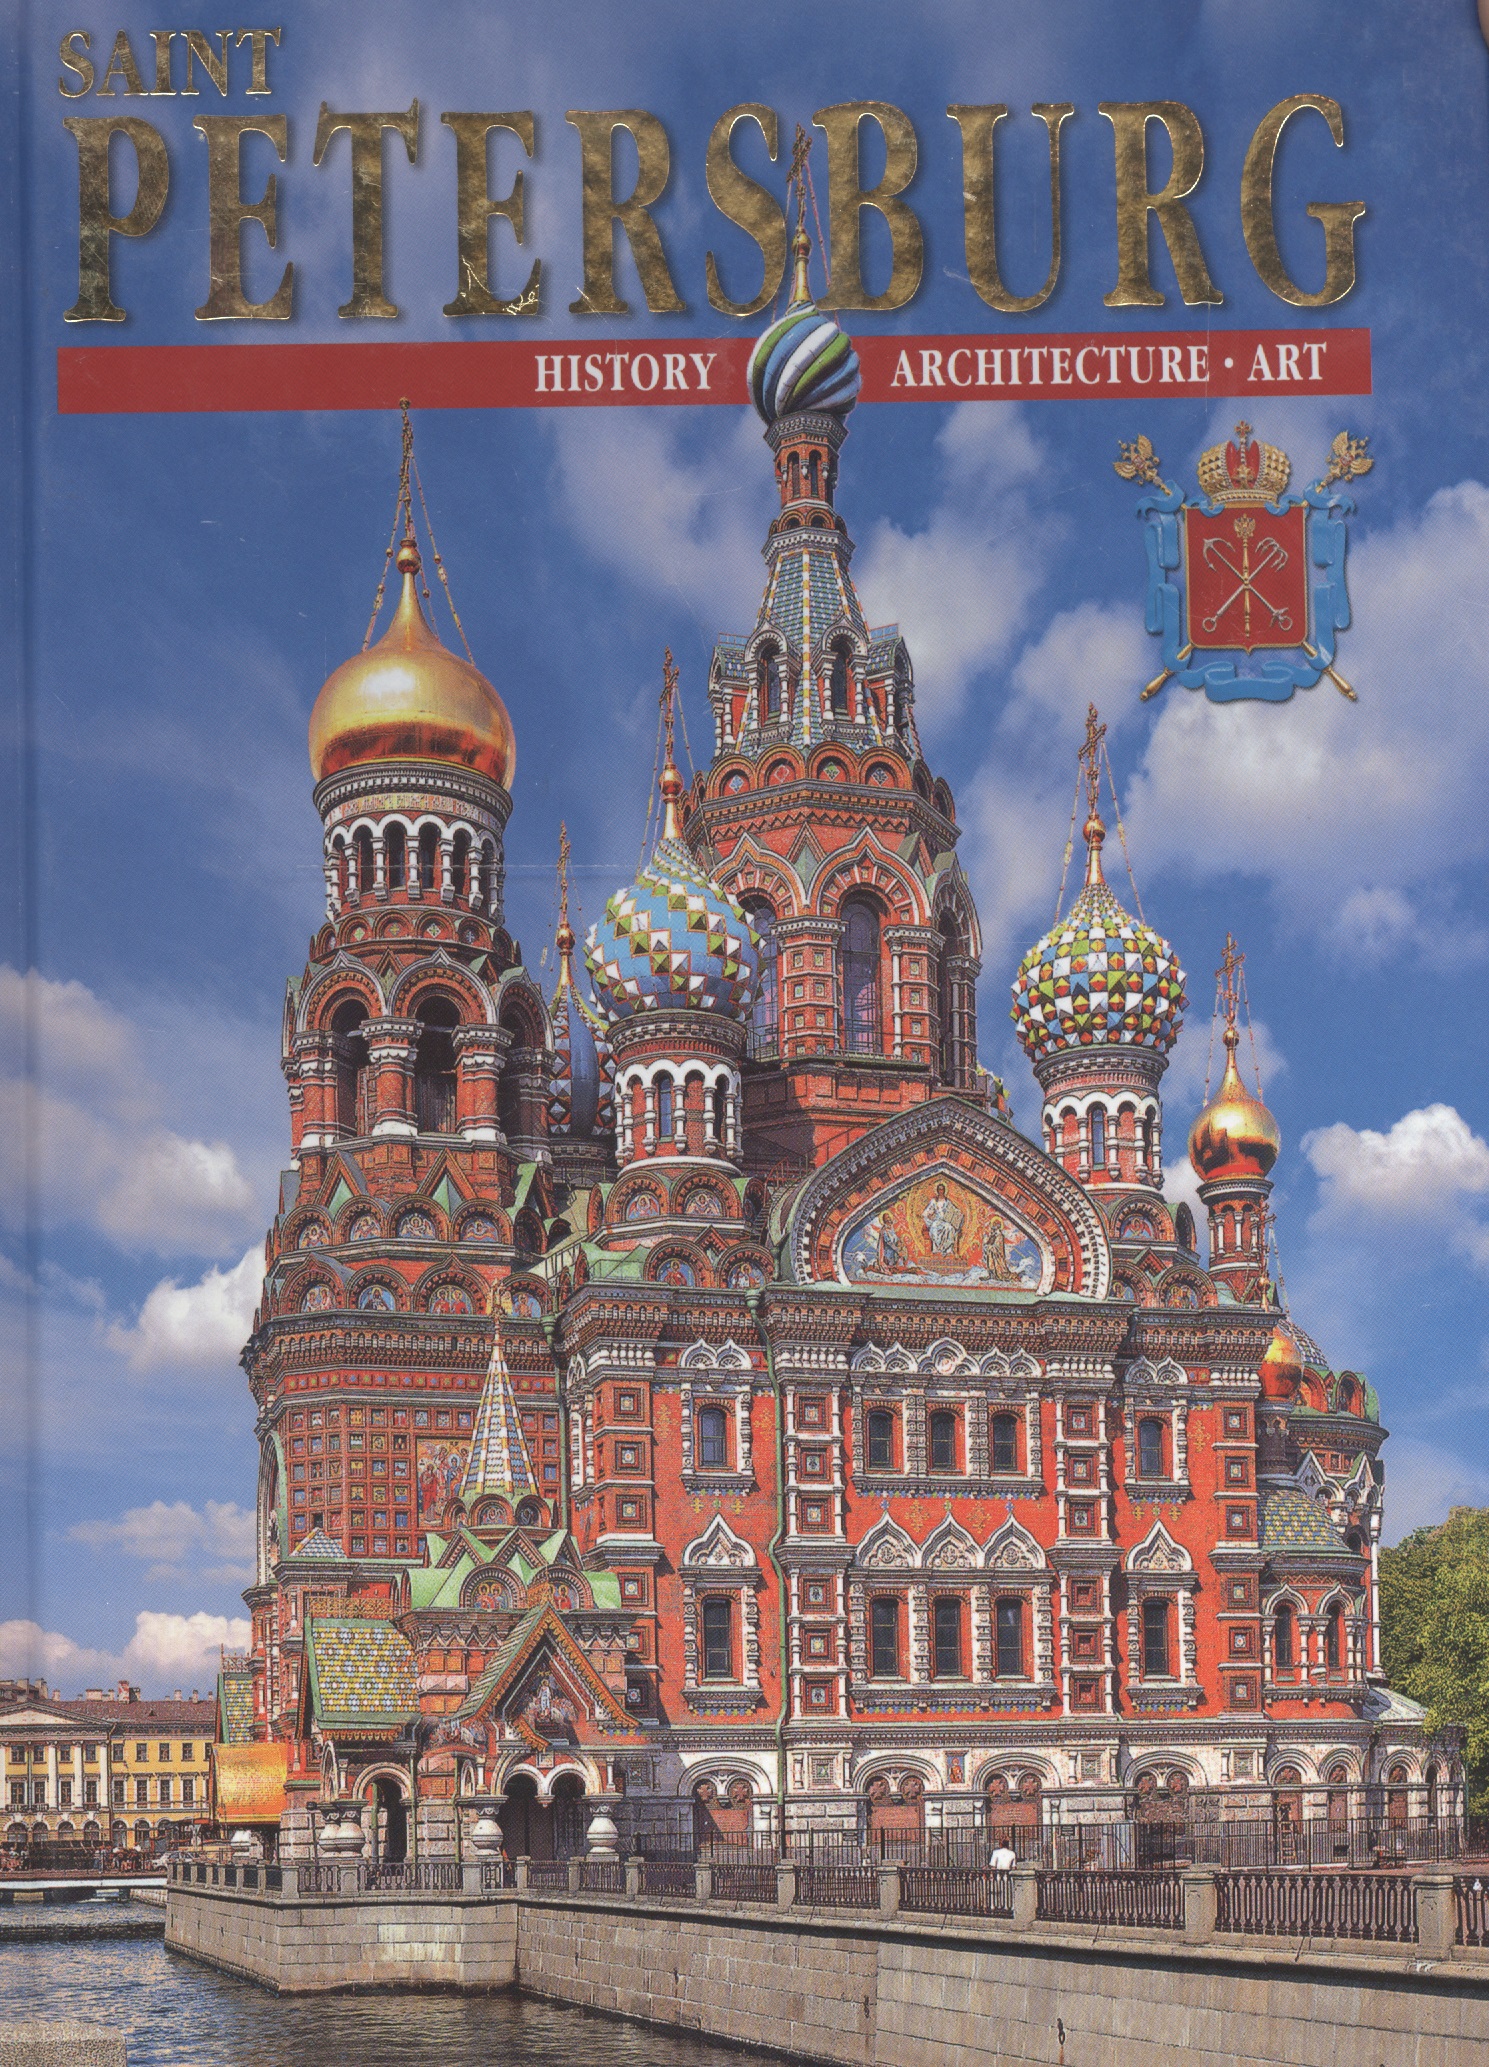 лобанова т е guide saint petersburg and its environs one day pedestrian routes Popova N. Saint Petersburg and its environs 300 years of glorious his